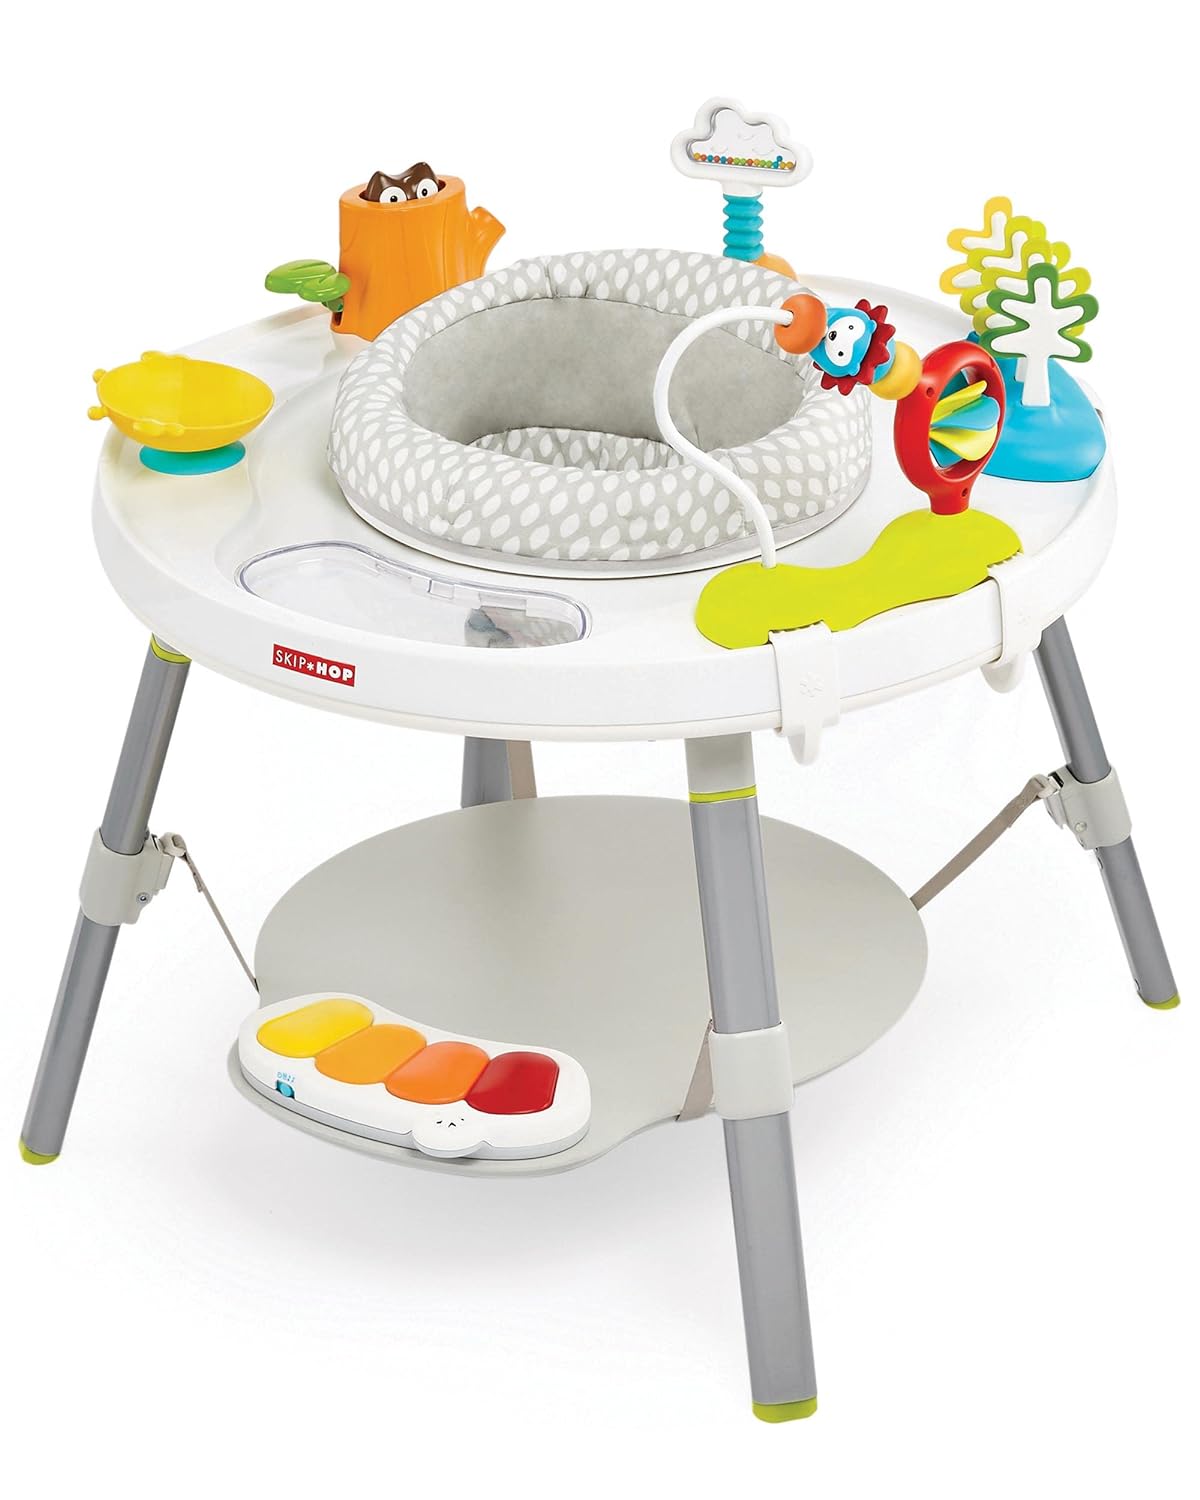 Skip Hop Baby Activity Center Review